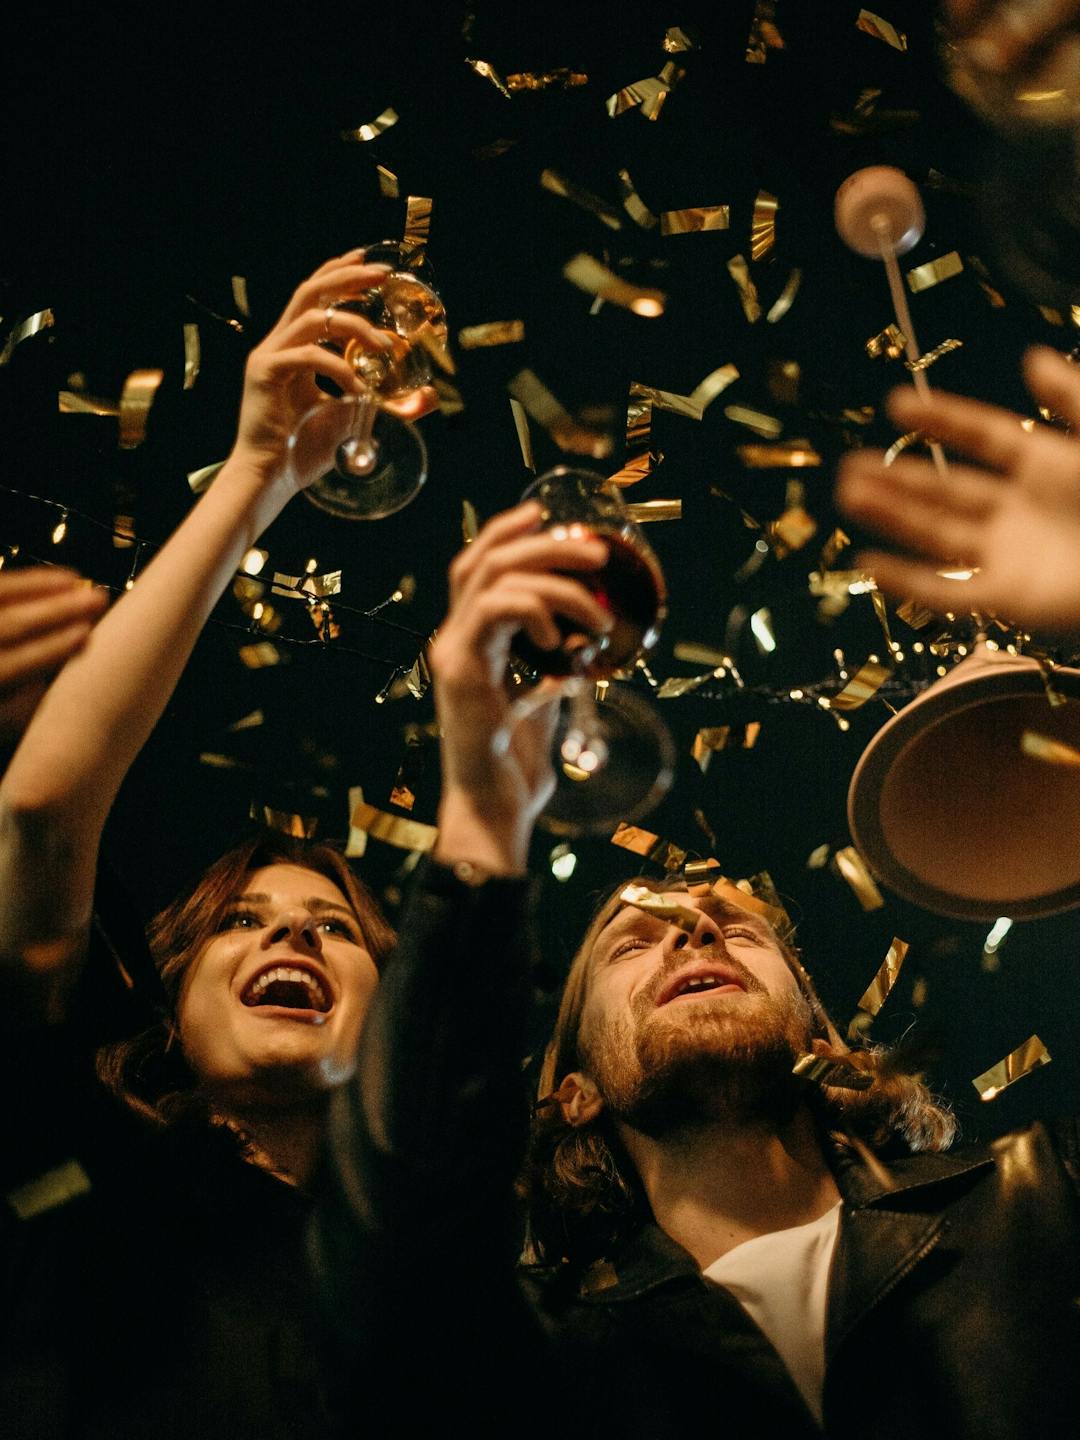 People celebrating at a party with a toast.